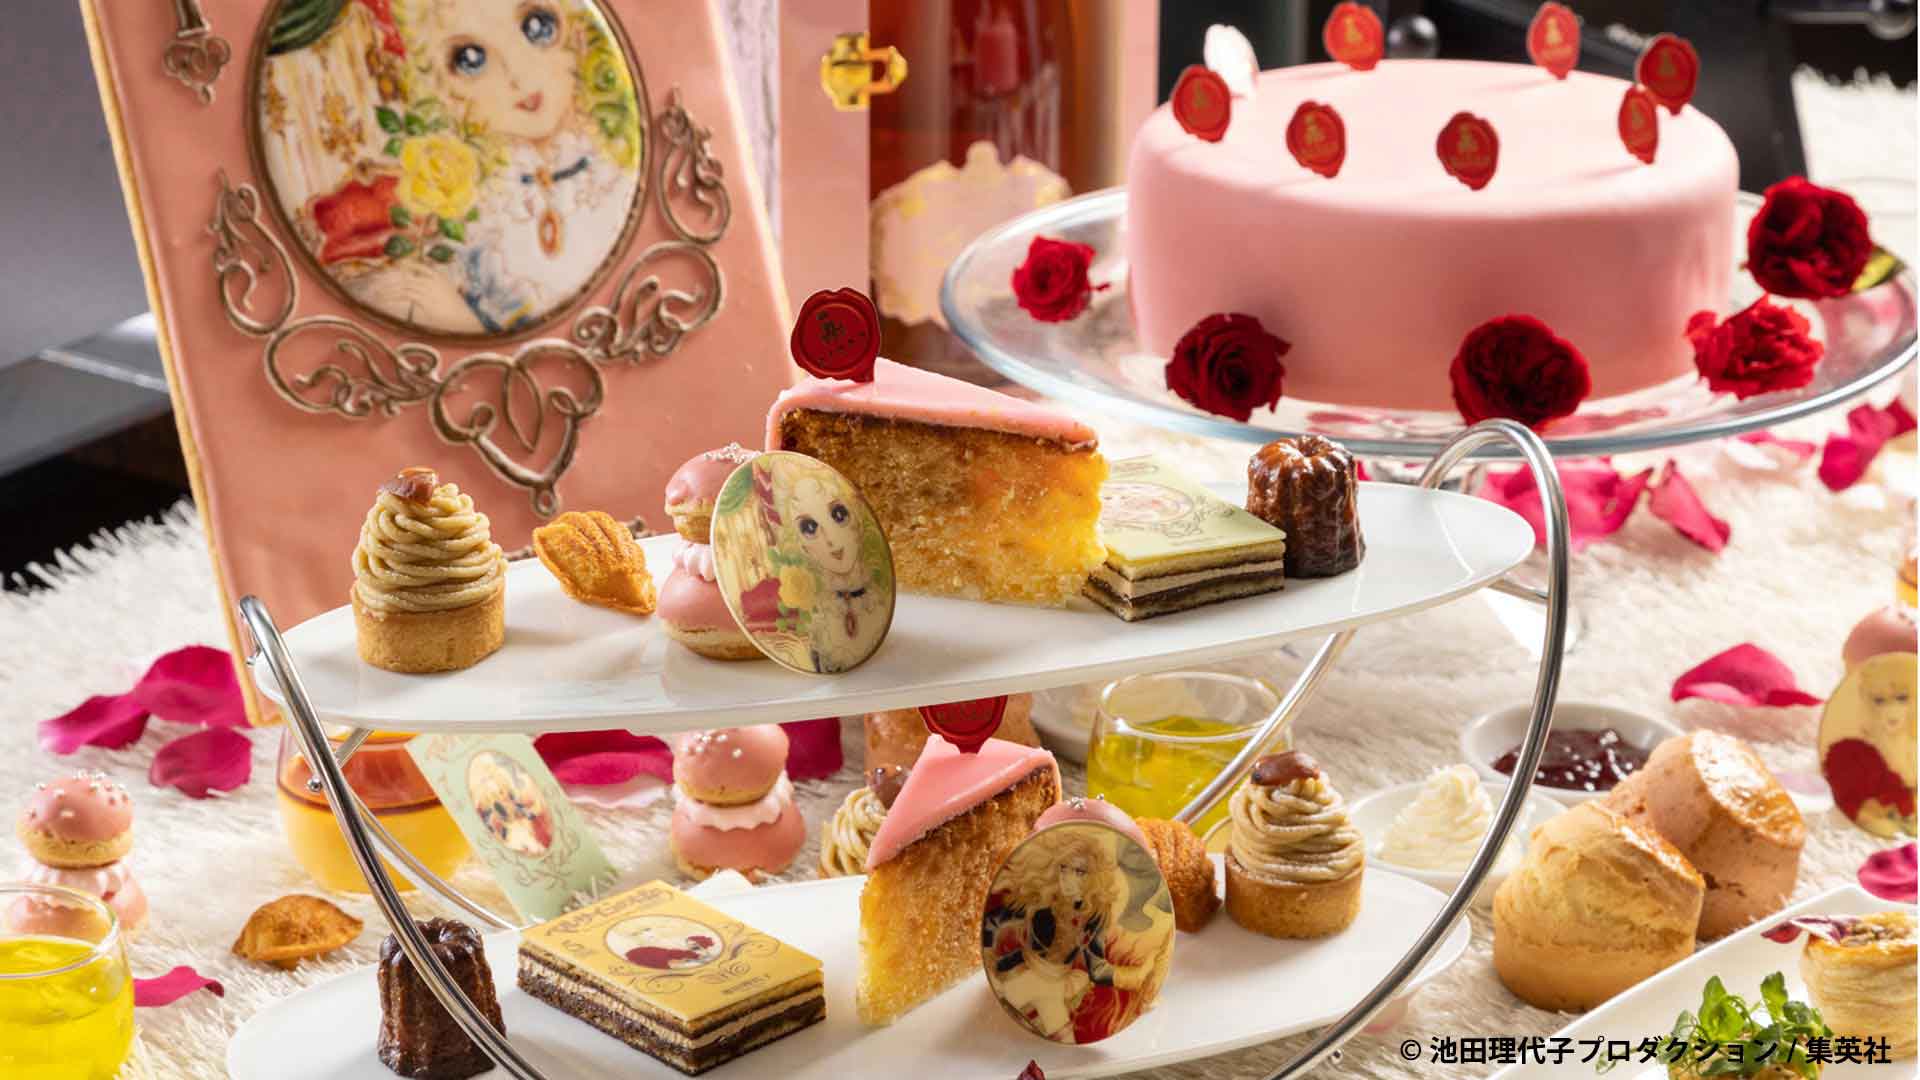 『The Rose of Versailles』Special plans - Stay, Nails and Afternoon Tea